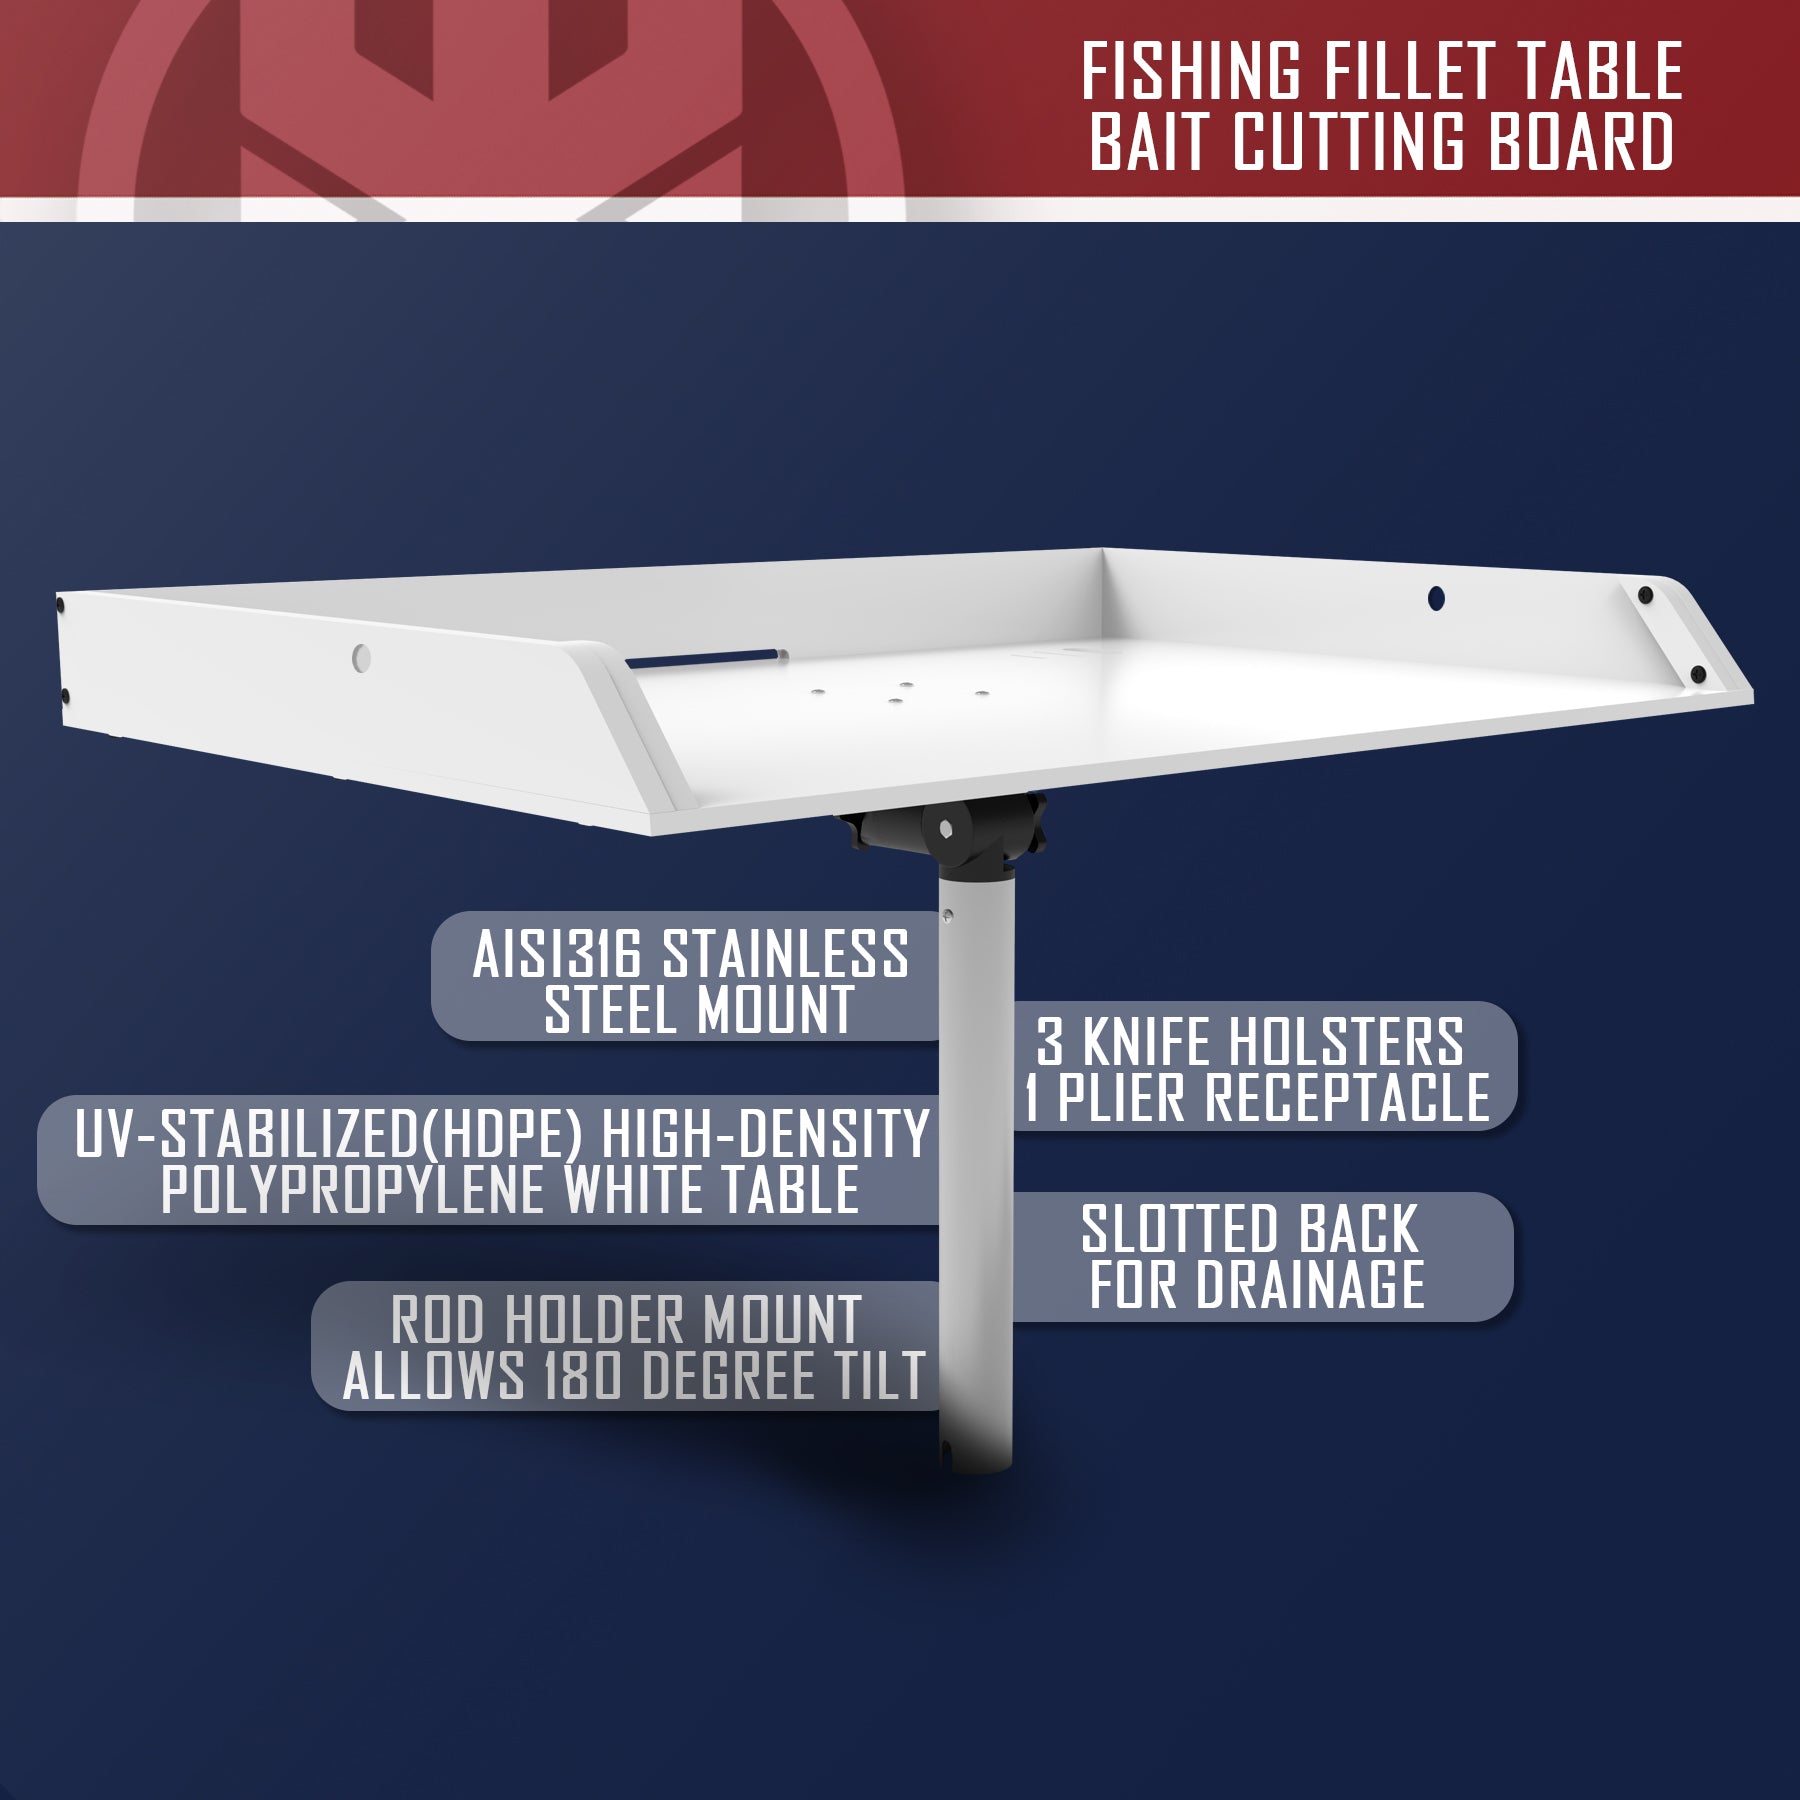 Boat Cutting Board Rod Holder Bait Station and Filet Table for Boat